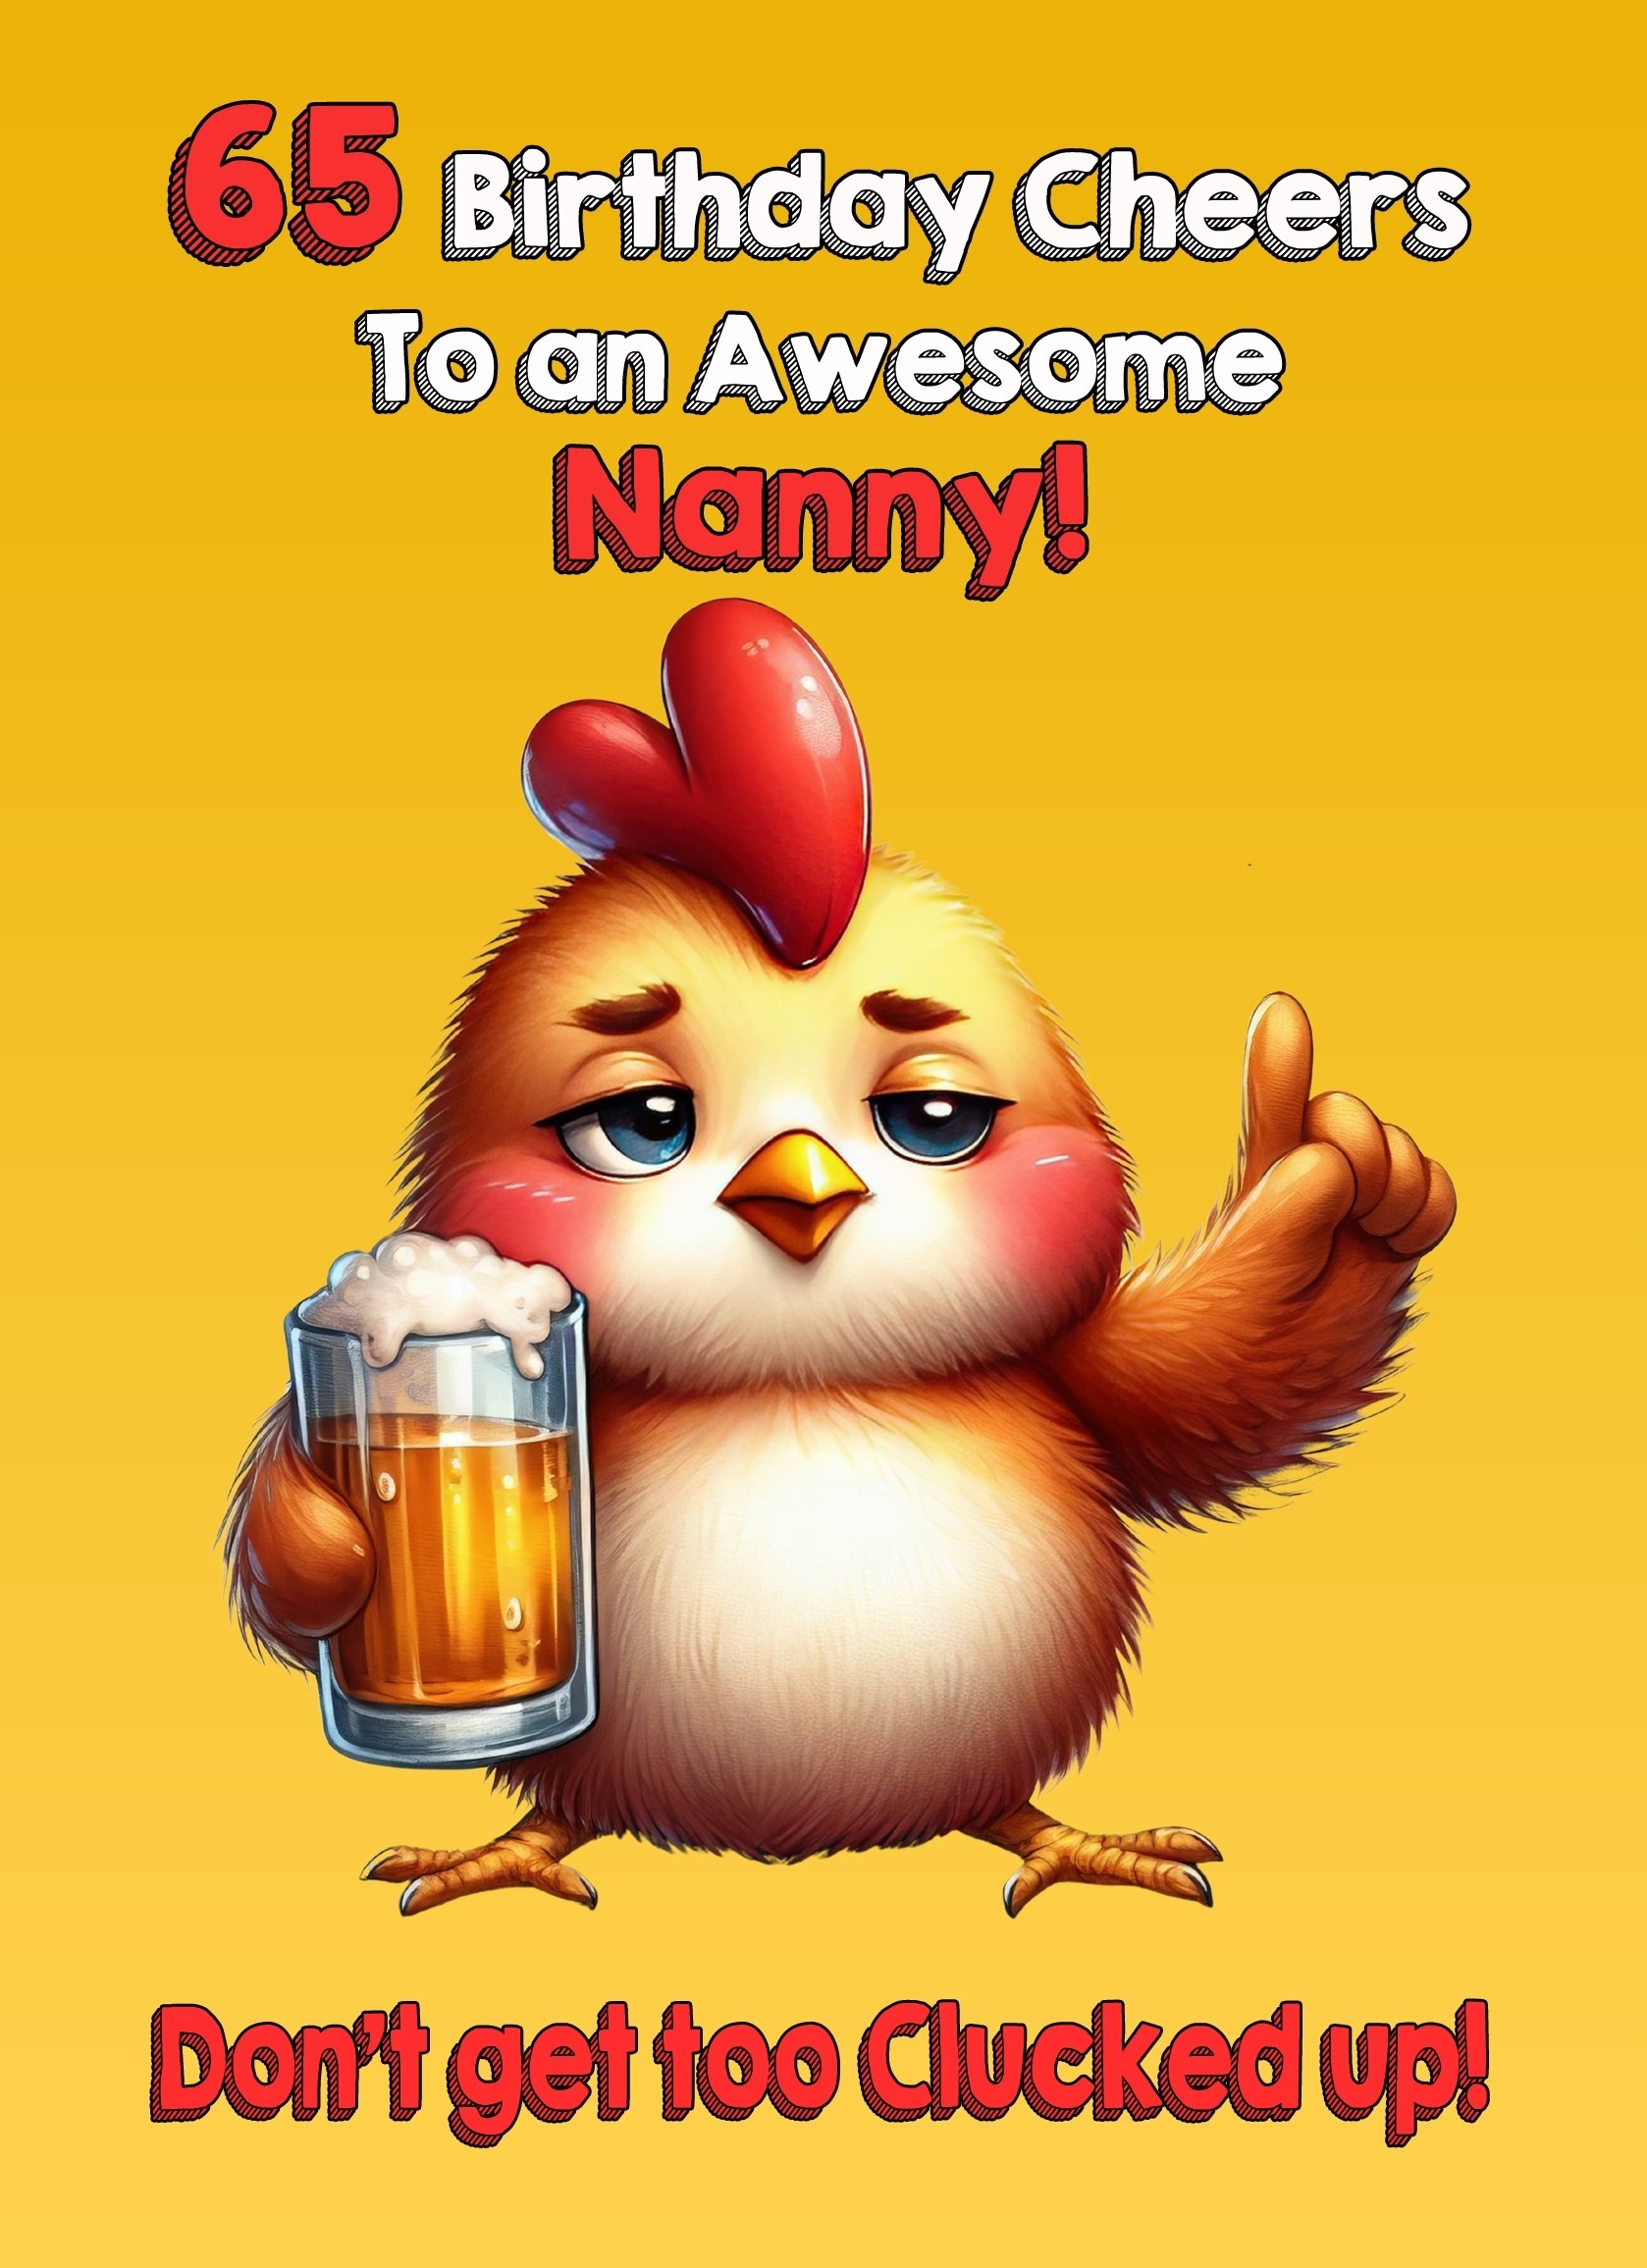 Nanny 65th Birthday Card (Funny Beer Chicken Humour)